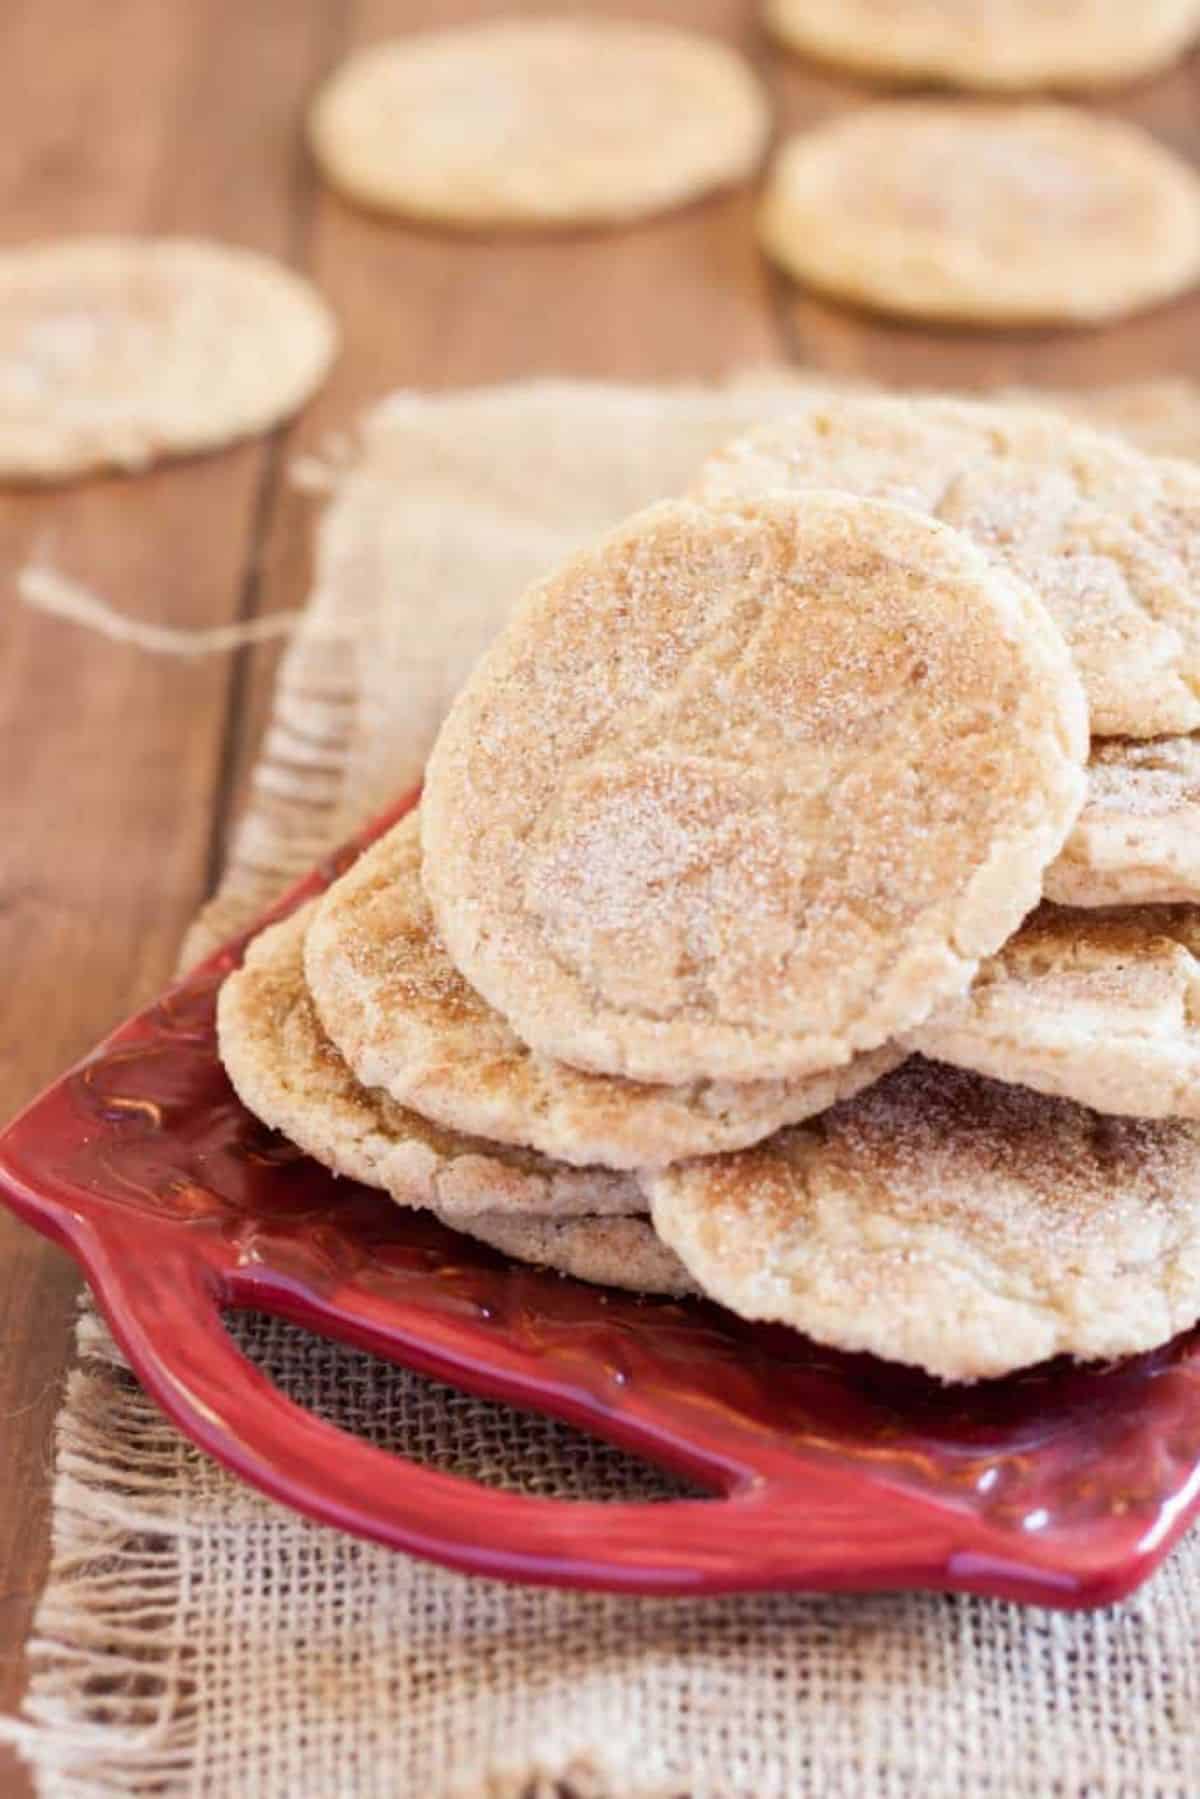 Delicious Gluten-Free Snickerdoodles Cookies on a red tray.